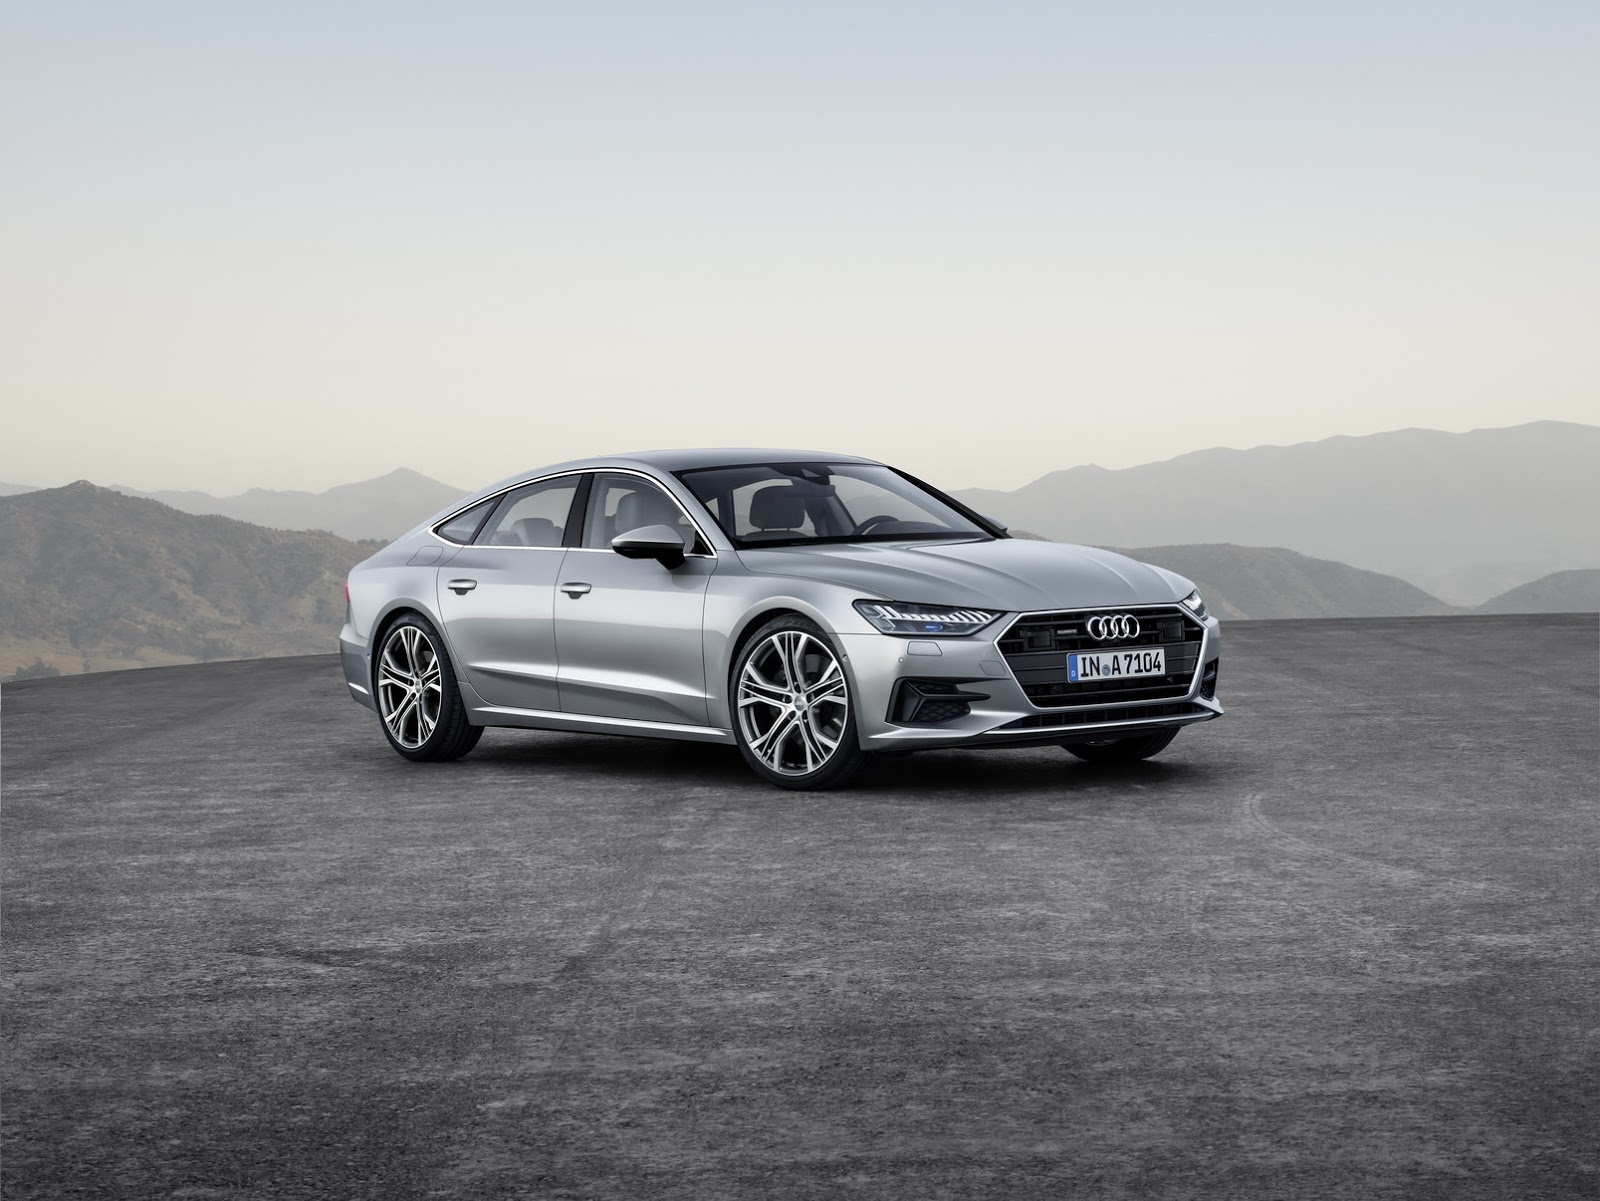 2019 Audi A7 Debuts With More Screens, LEDs and Technology ...